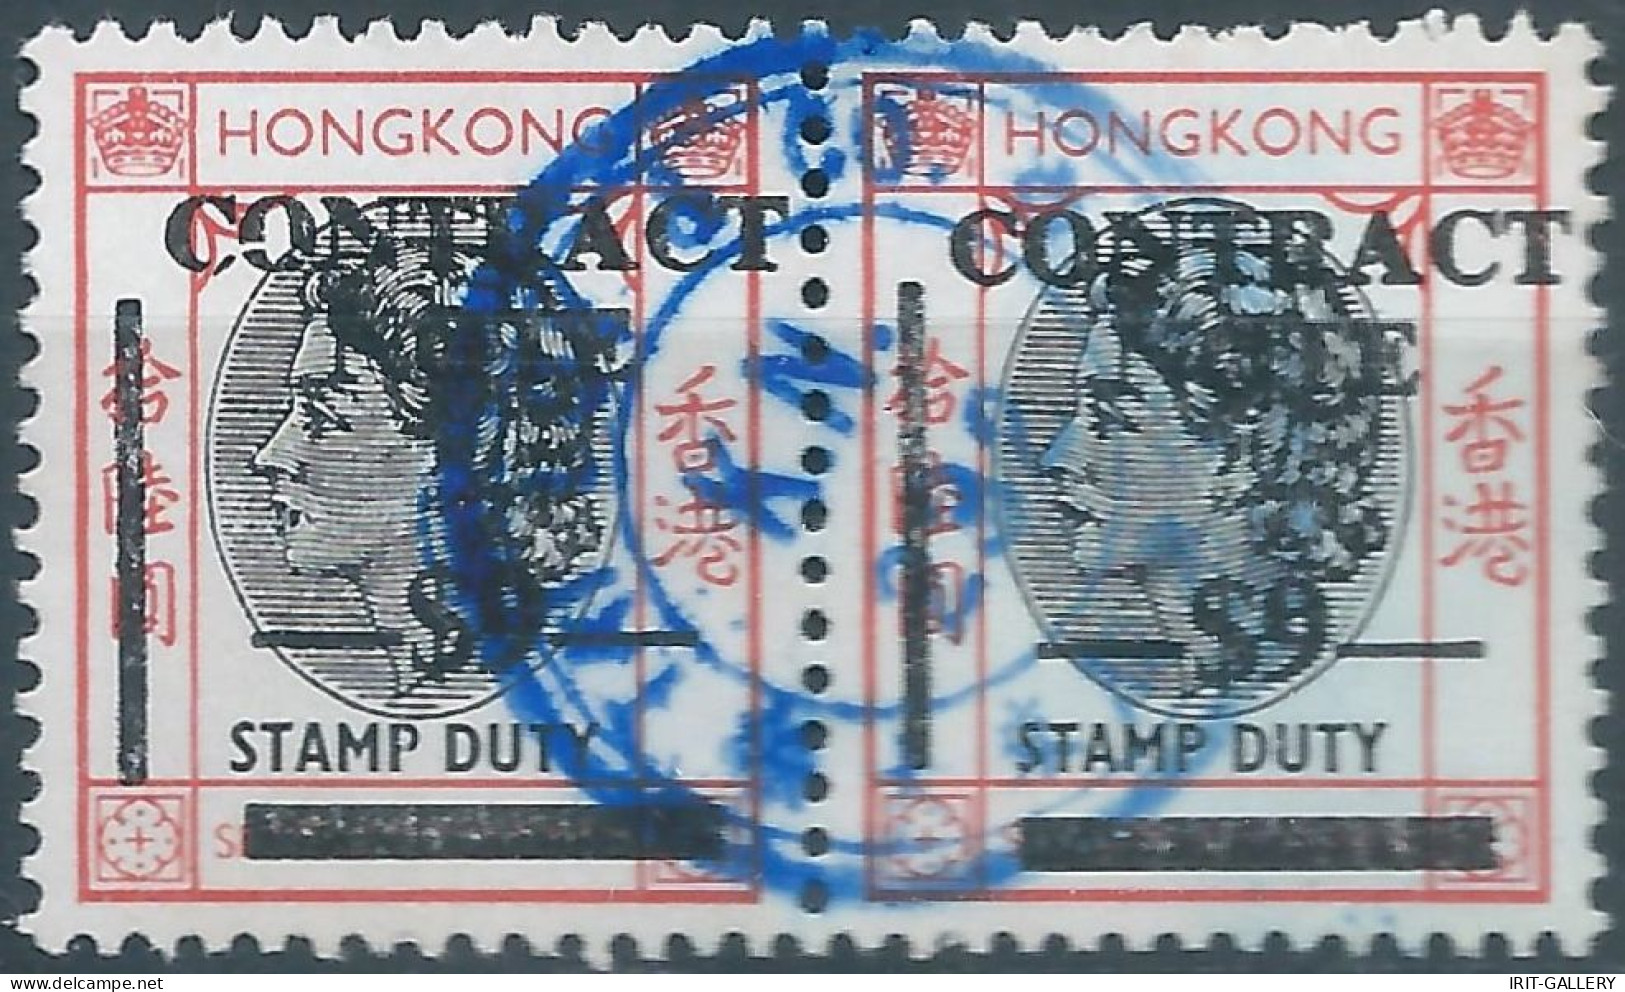 Great Britain-ENGLAND,HONG KONG Revenue Stamp DUTY Contract $9 In Pairs With The Central Cancelled - Timbres Fiscaux-postaux